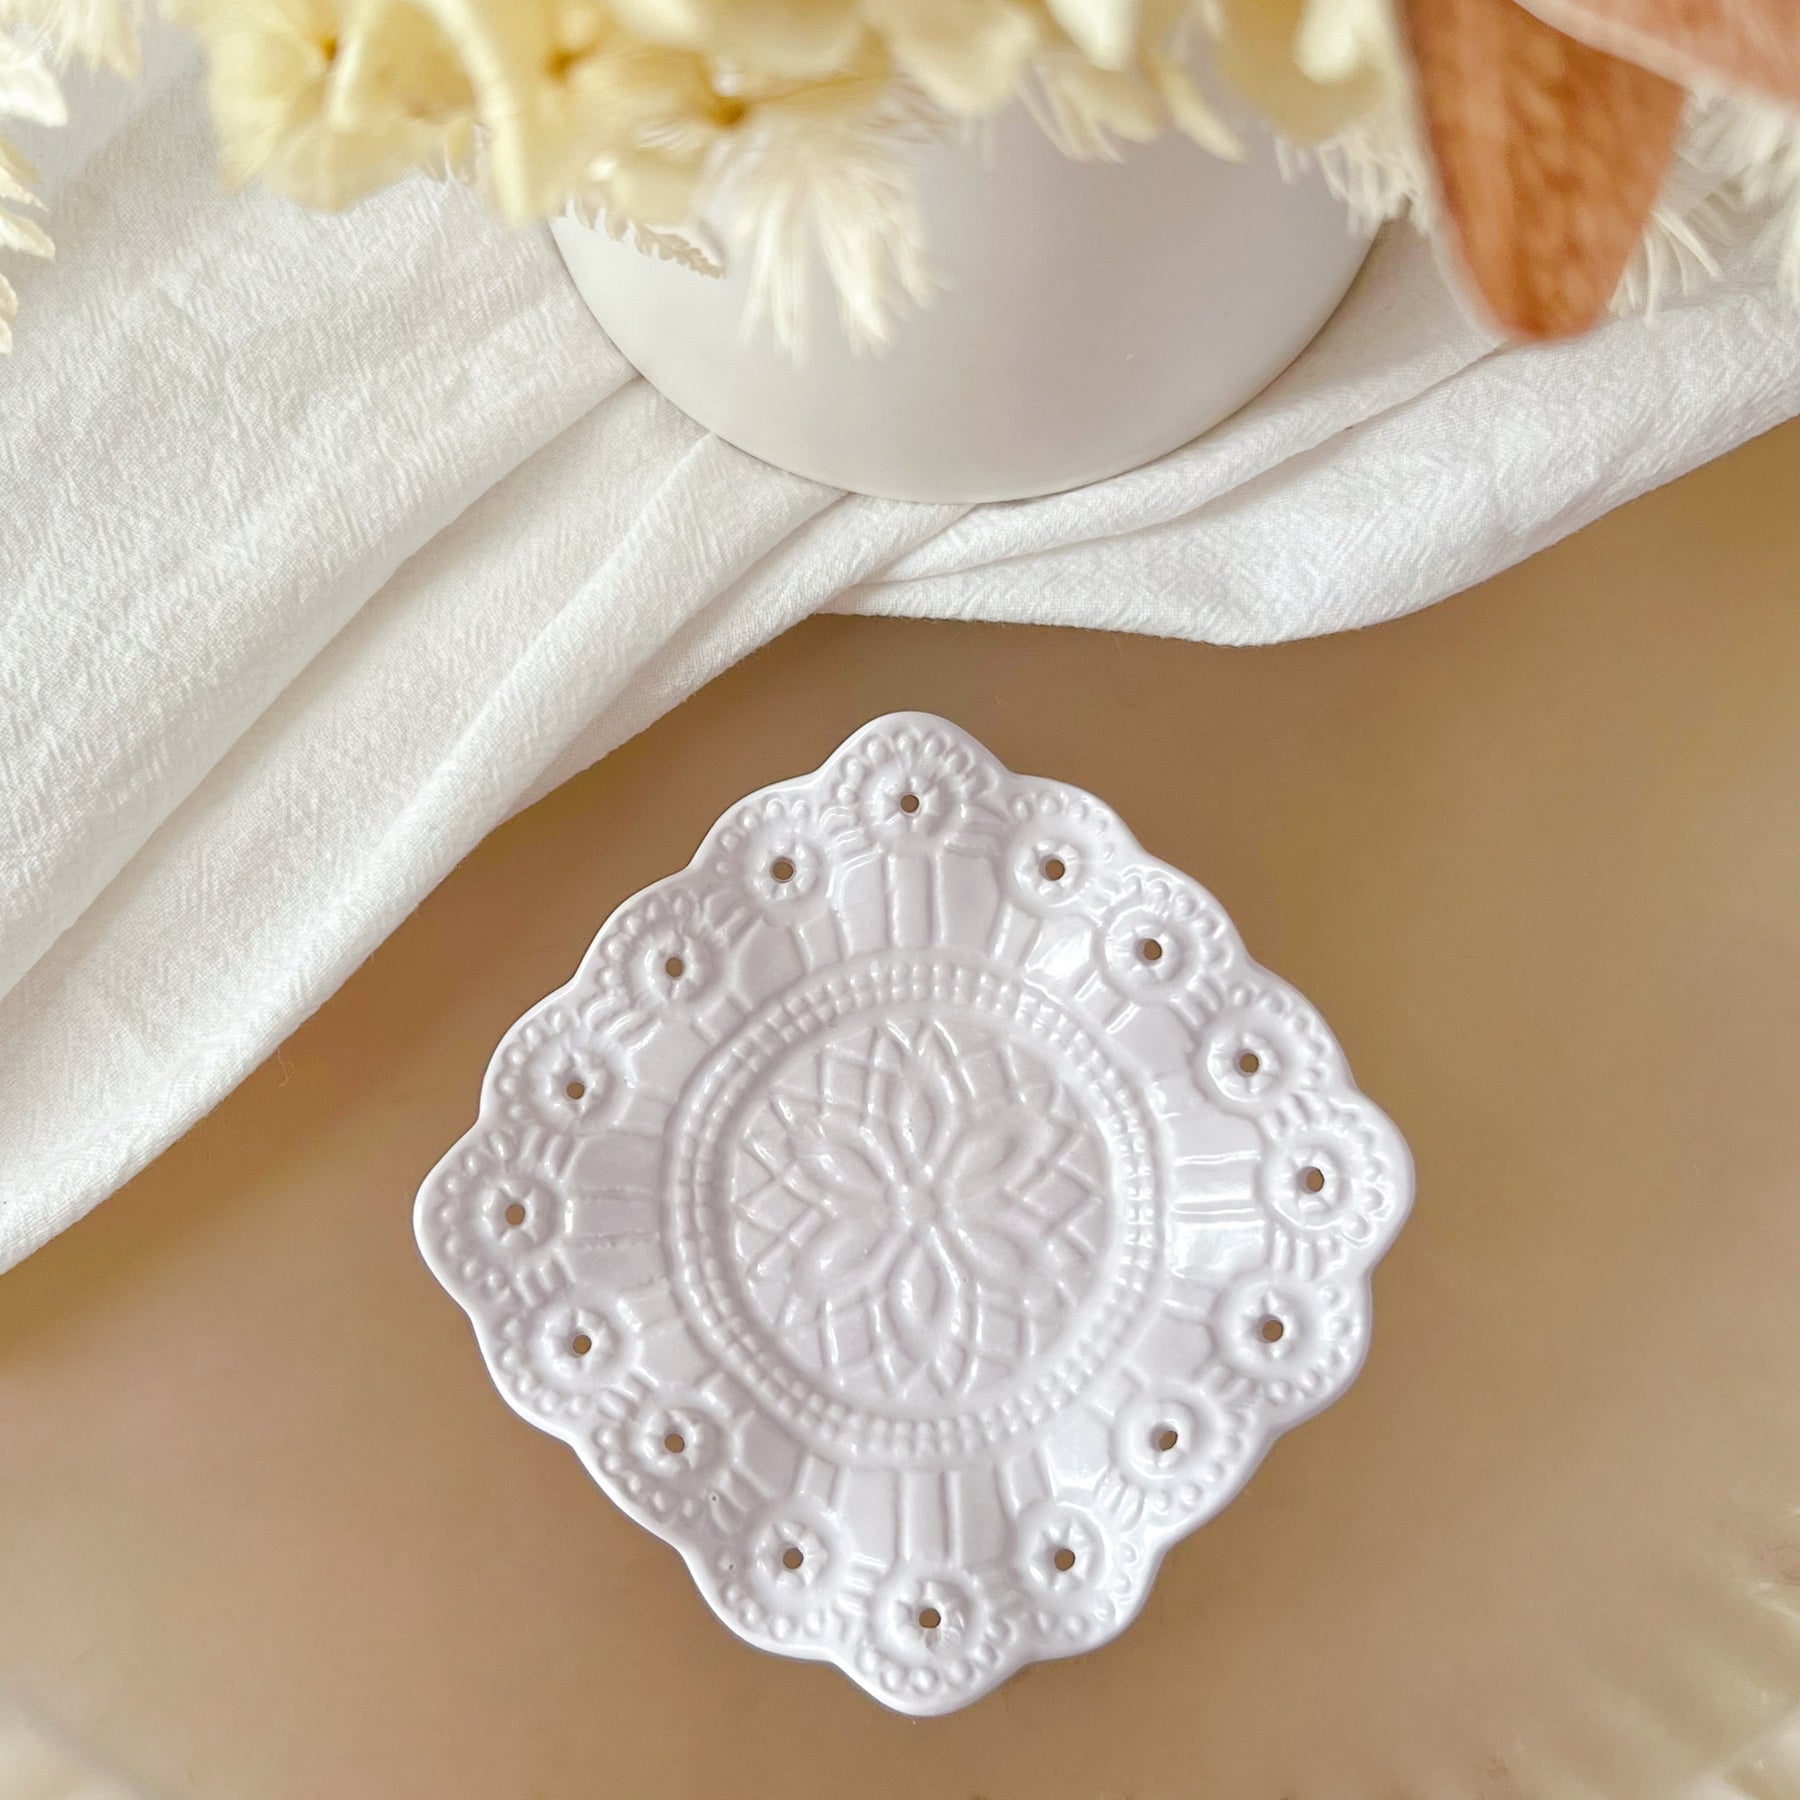 Handcrafted Vintage Frill Decorative Tray | Trinket Dish - LMJ Candles